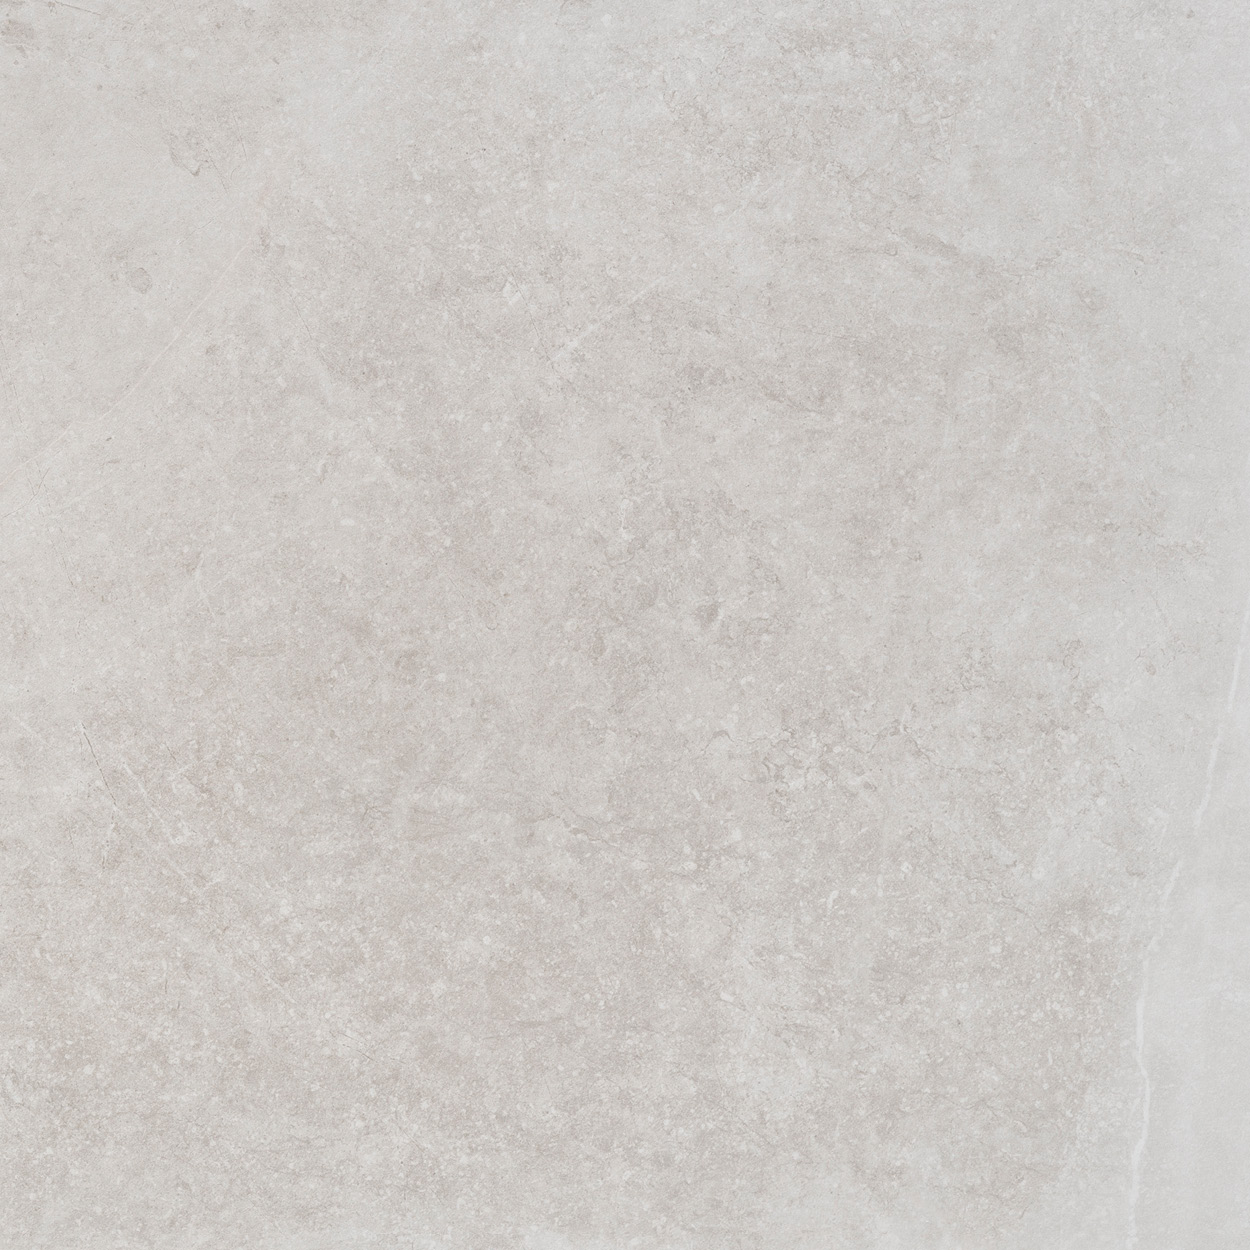 32 X 32 Evo Stone Ivory Honed finished Rectified Porcelain Tile (SPECIAL ORDER ONLY)